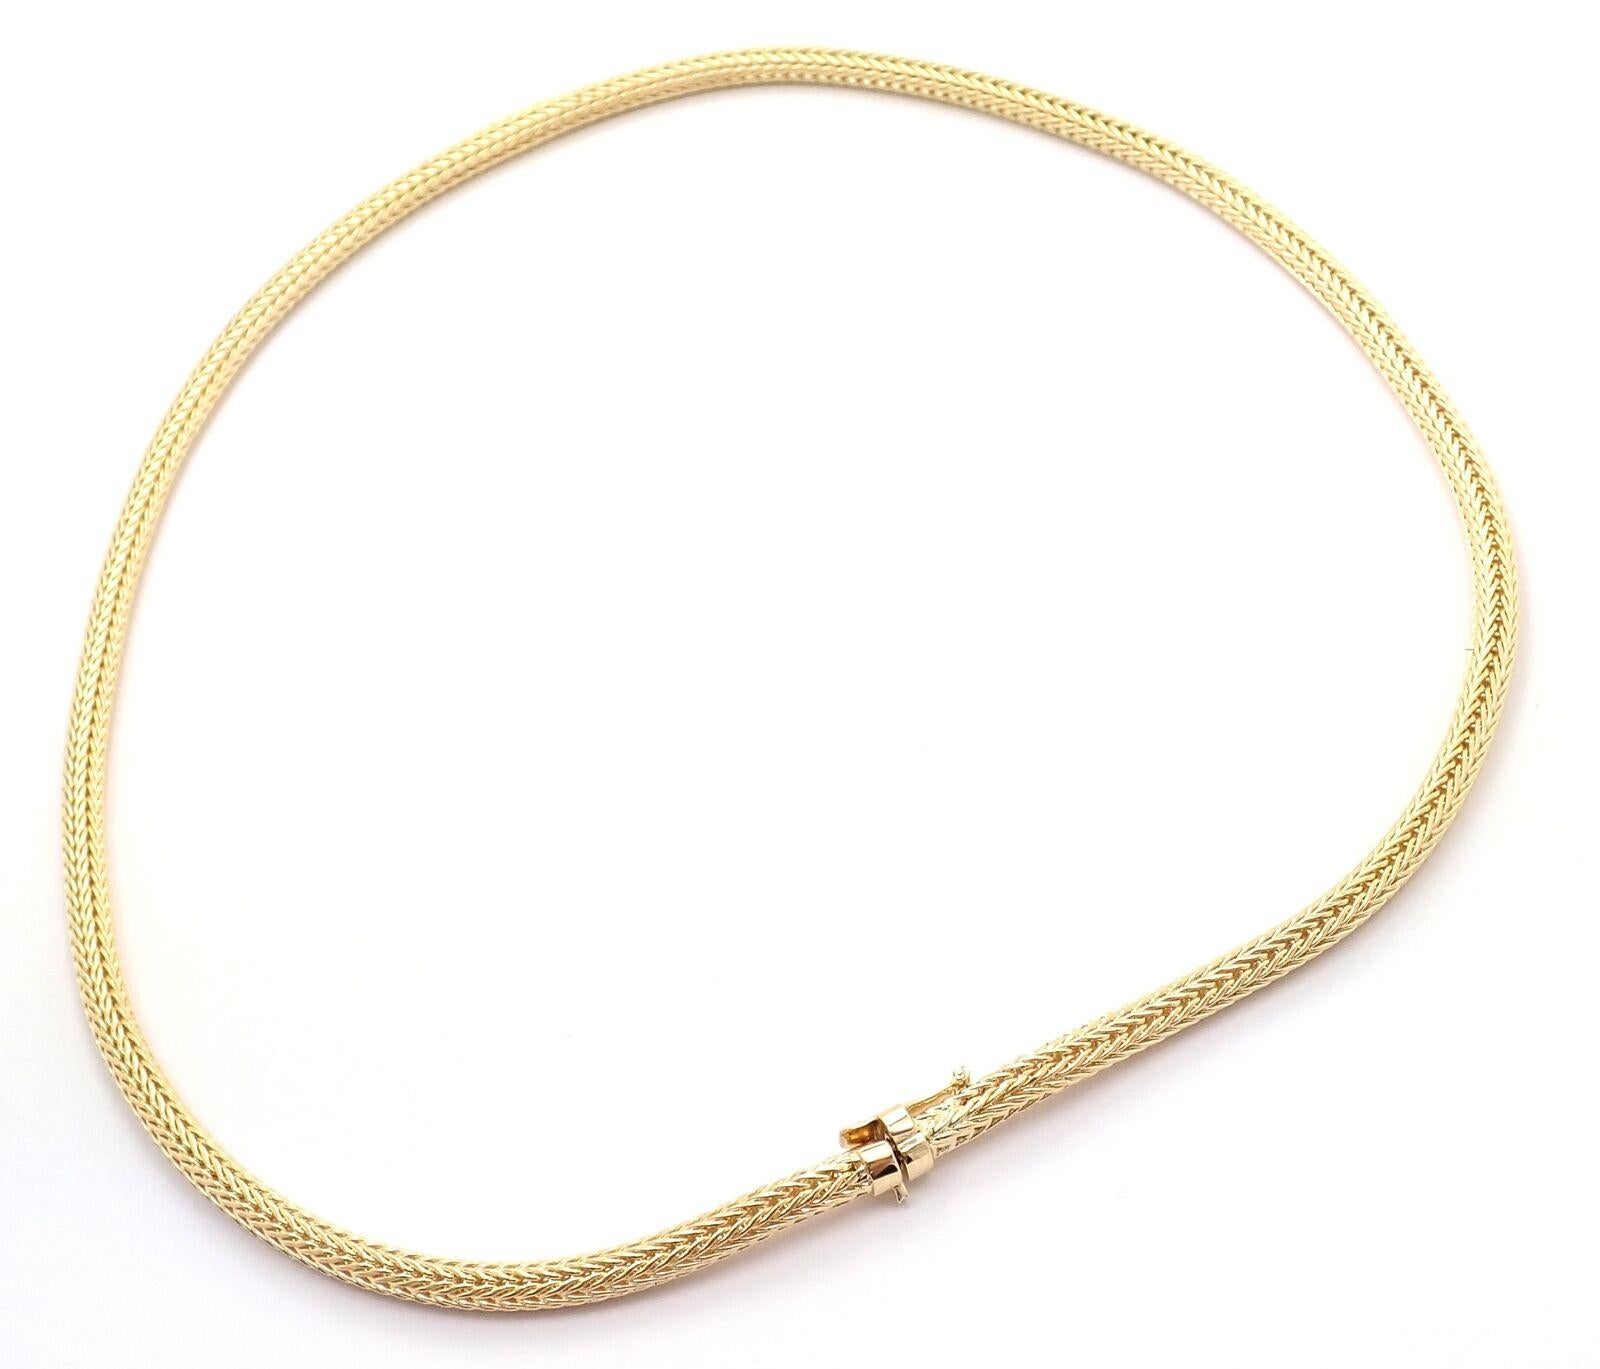 18k Yellow Gold Vintage Foxtail Chain Necklace by Tiffany Co.
Details: 
Length: 17.25